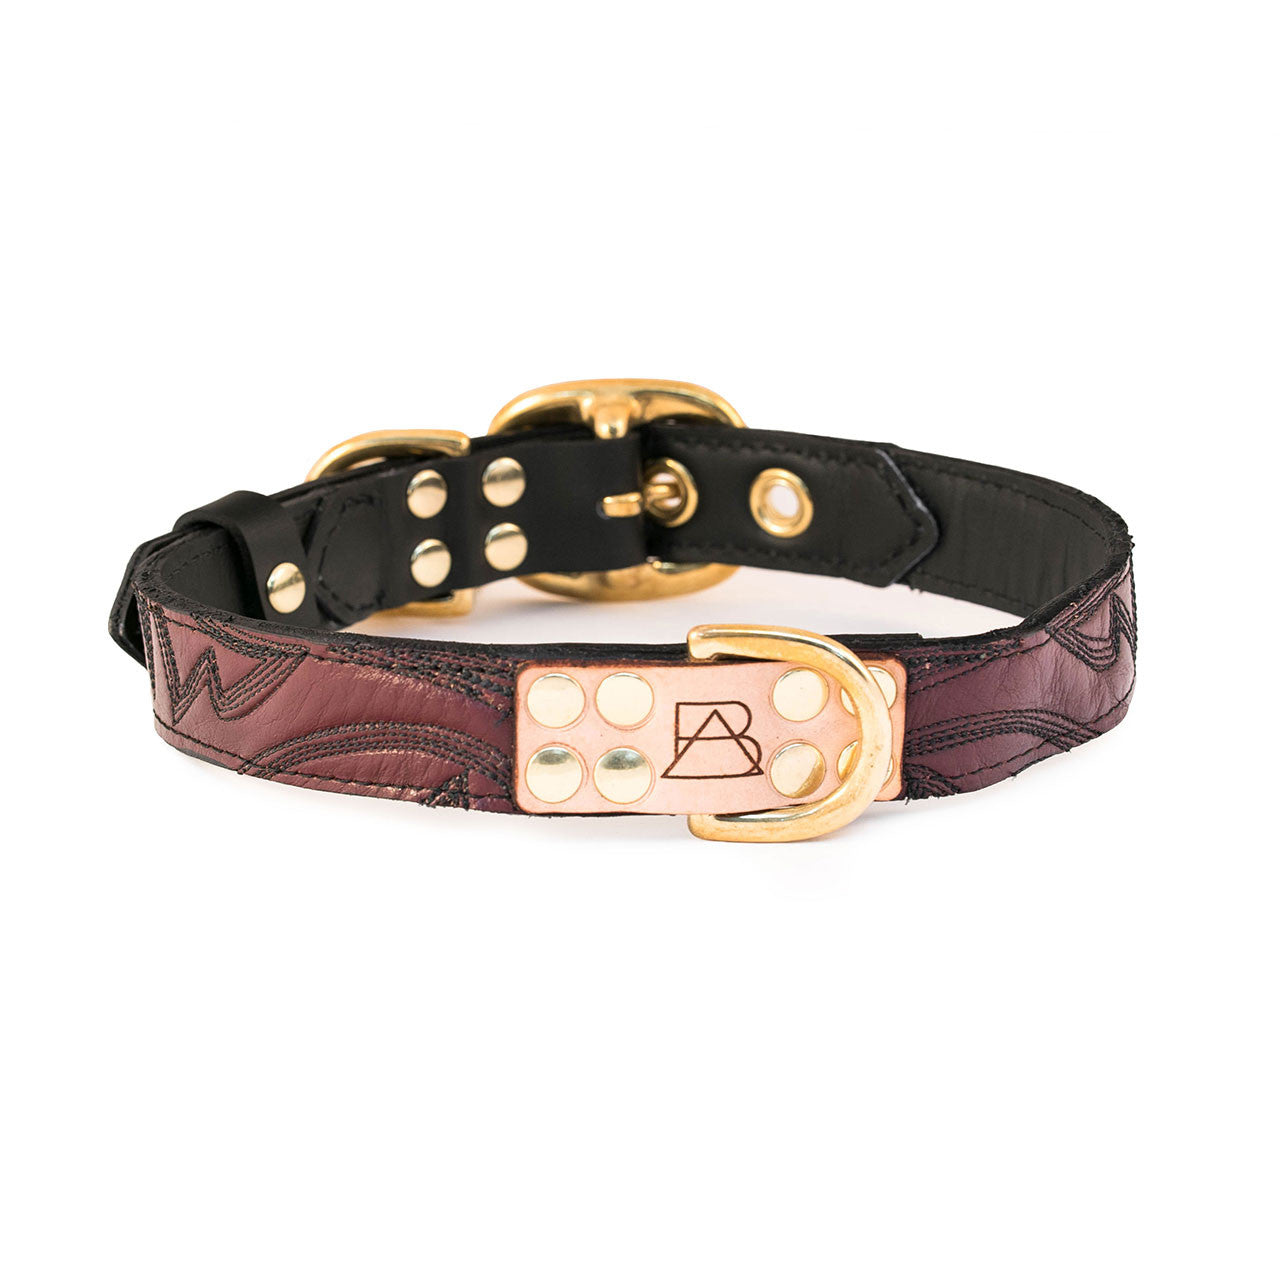 Black Dog Collar with Brick Red Leather + Black Stitching